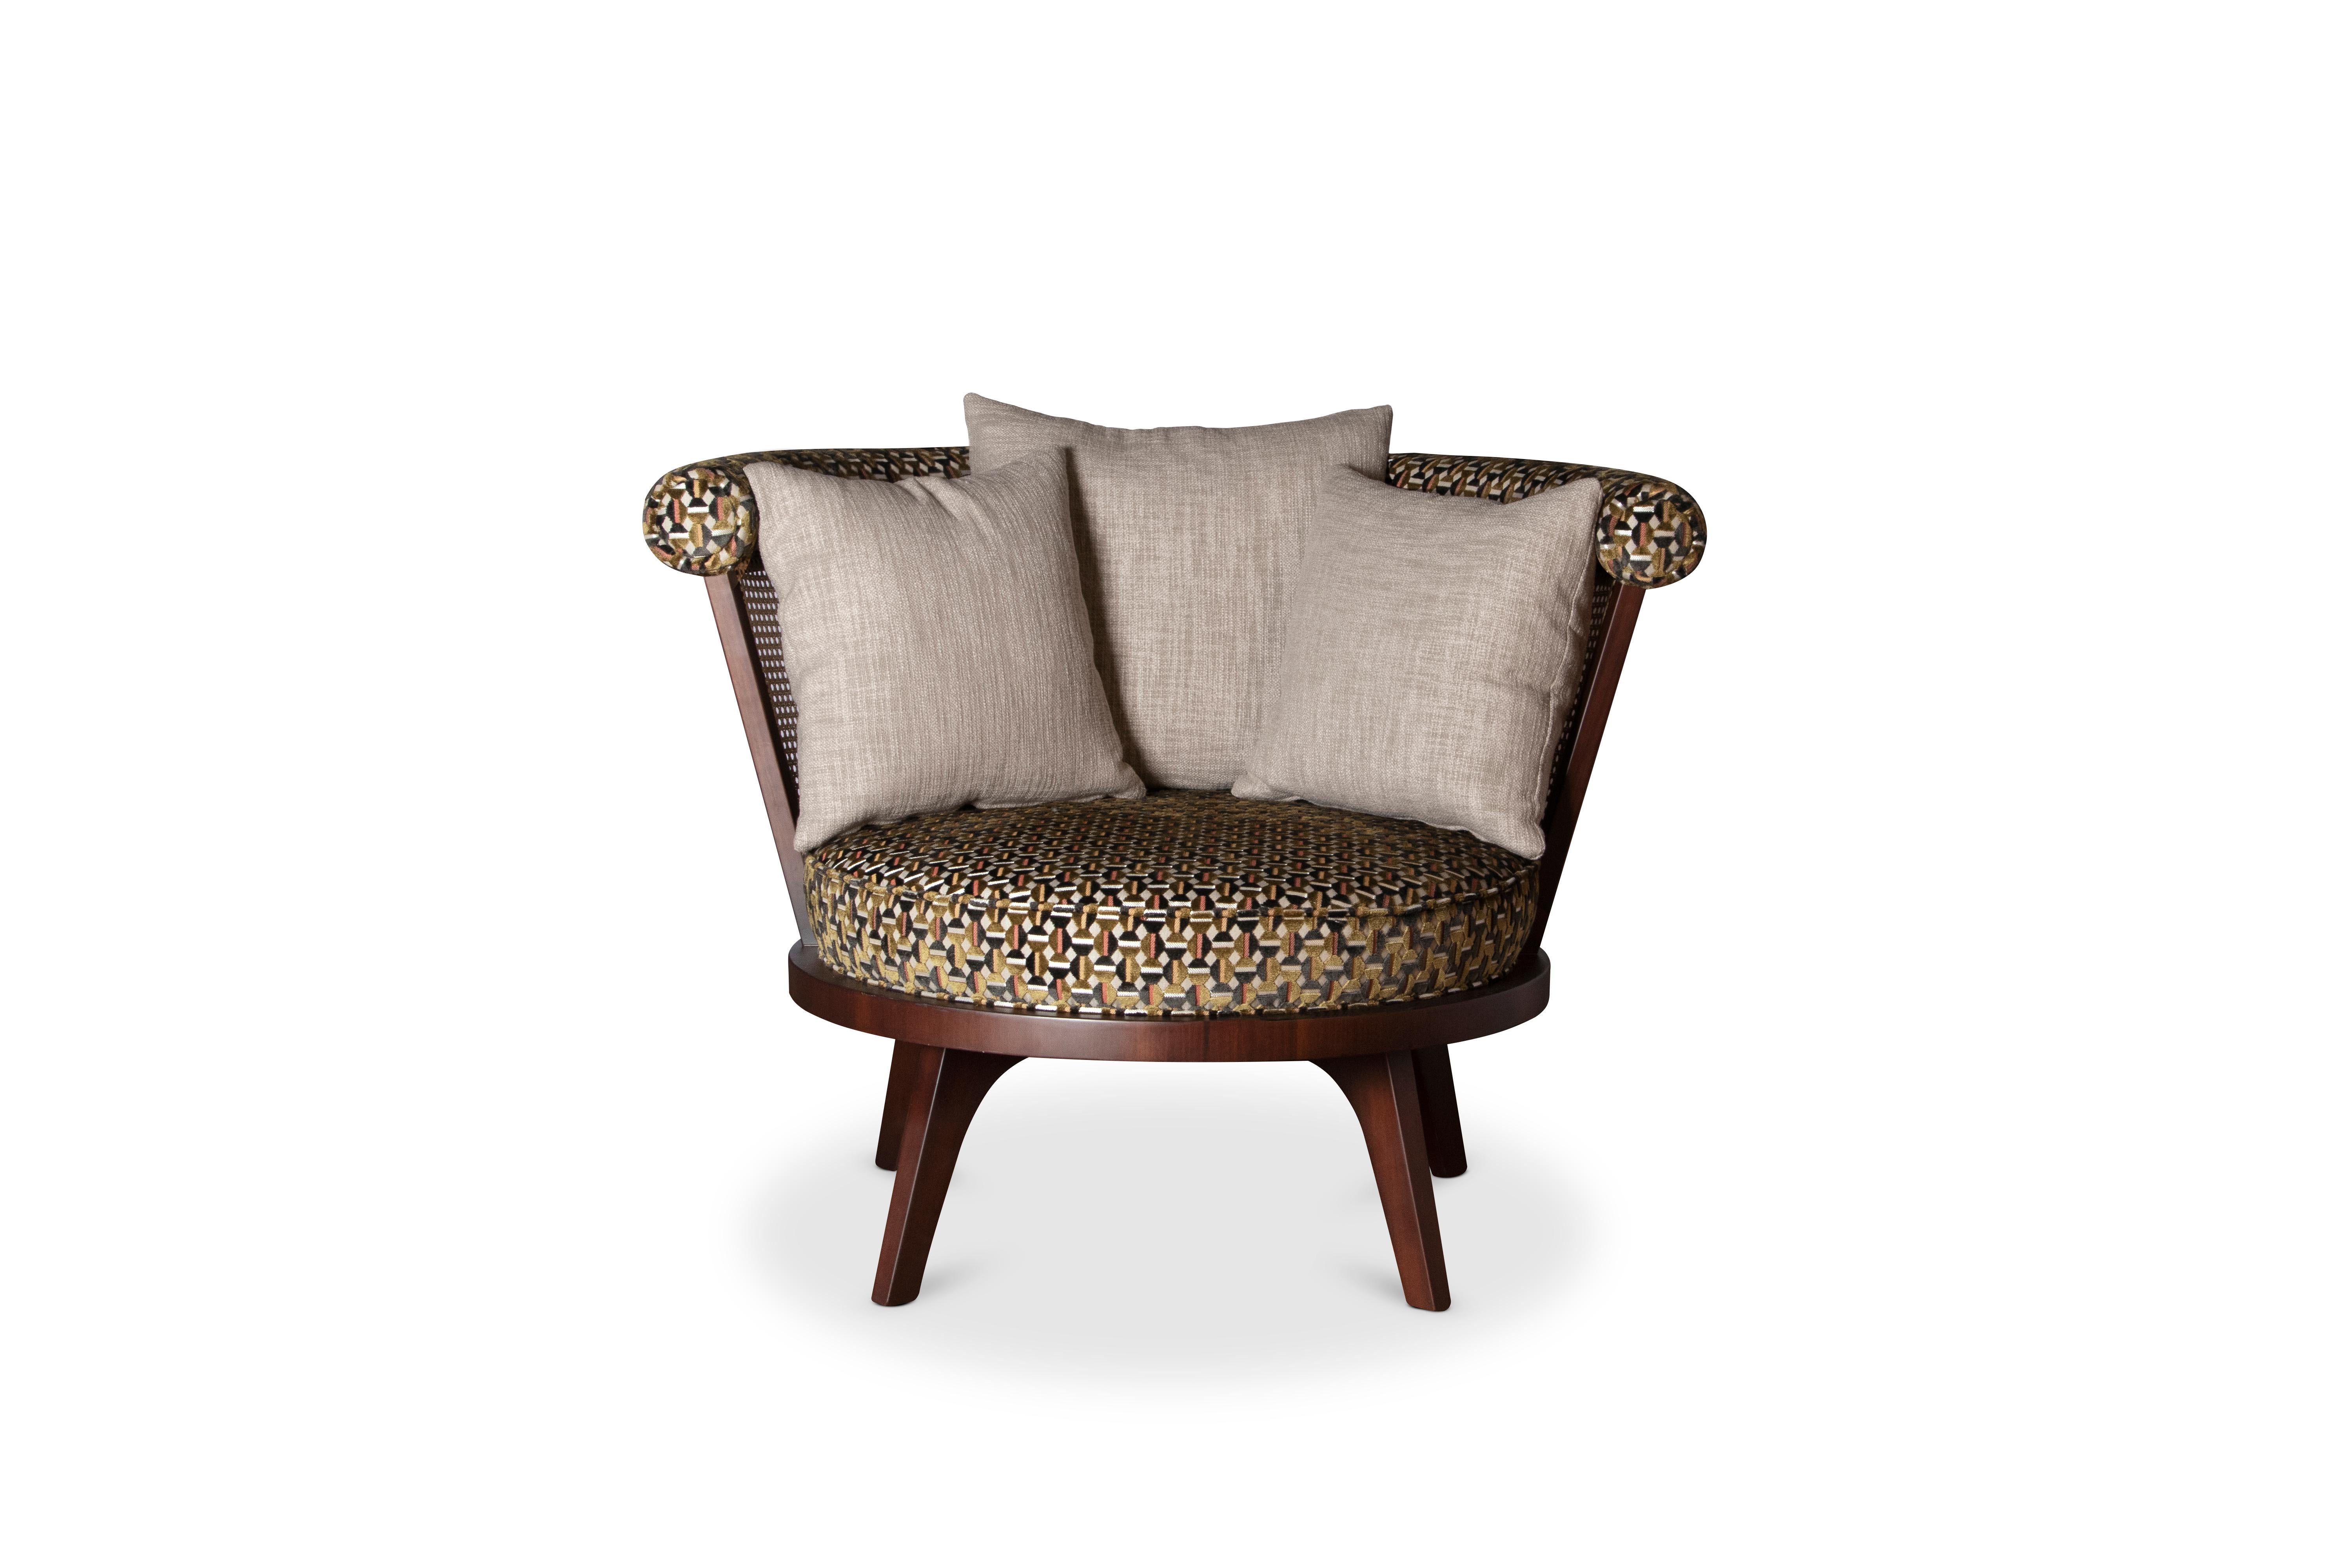 A membership application in a privilege club sometimes requires an endorsement by at least one club member. So, inspired by the symbolism of the act, George armchair takes the name of King George VI, a noble king who provided leadership and